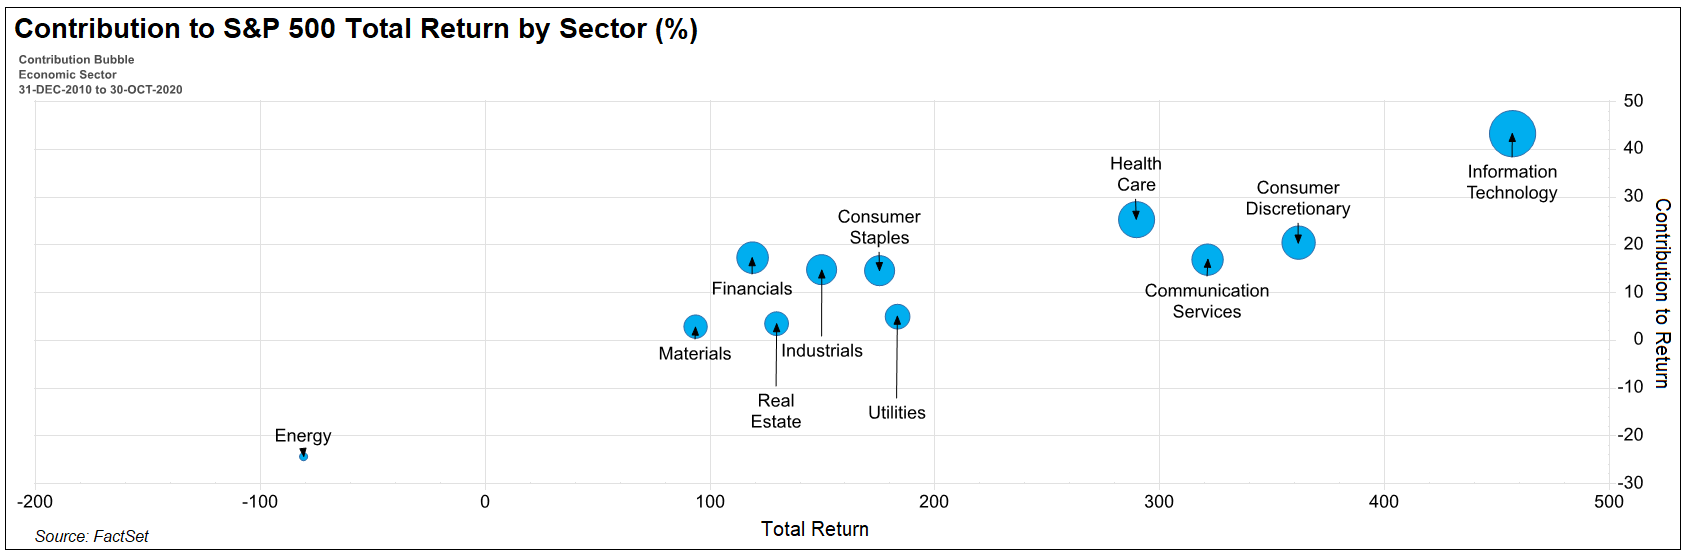 Contribution to S&P 500 Return by Sector